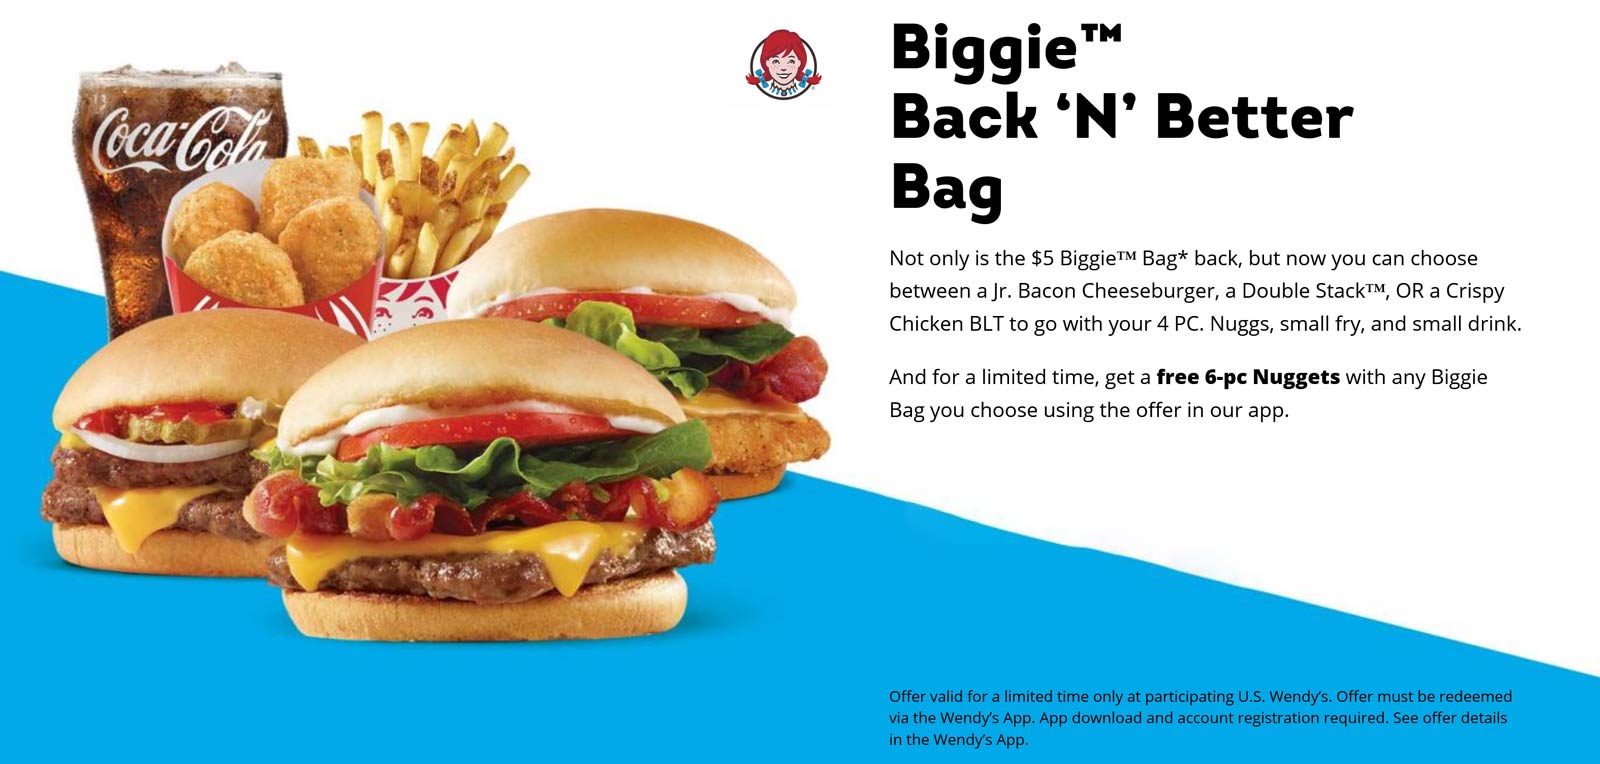 Wendys restaurants Coupon  Cheeseburger or chicken BLT + 10pc nuggets + fries + drink = $5 via mobile at Wendys #wendys 